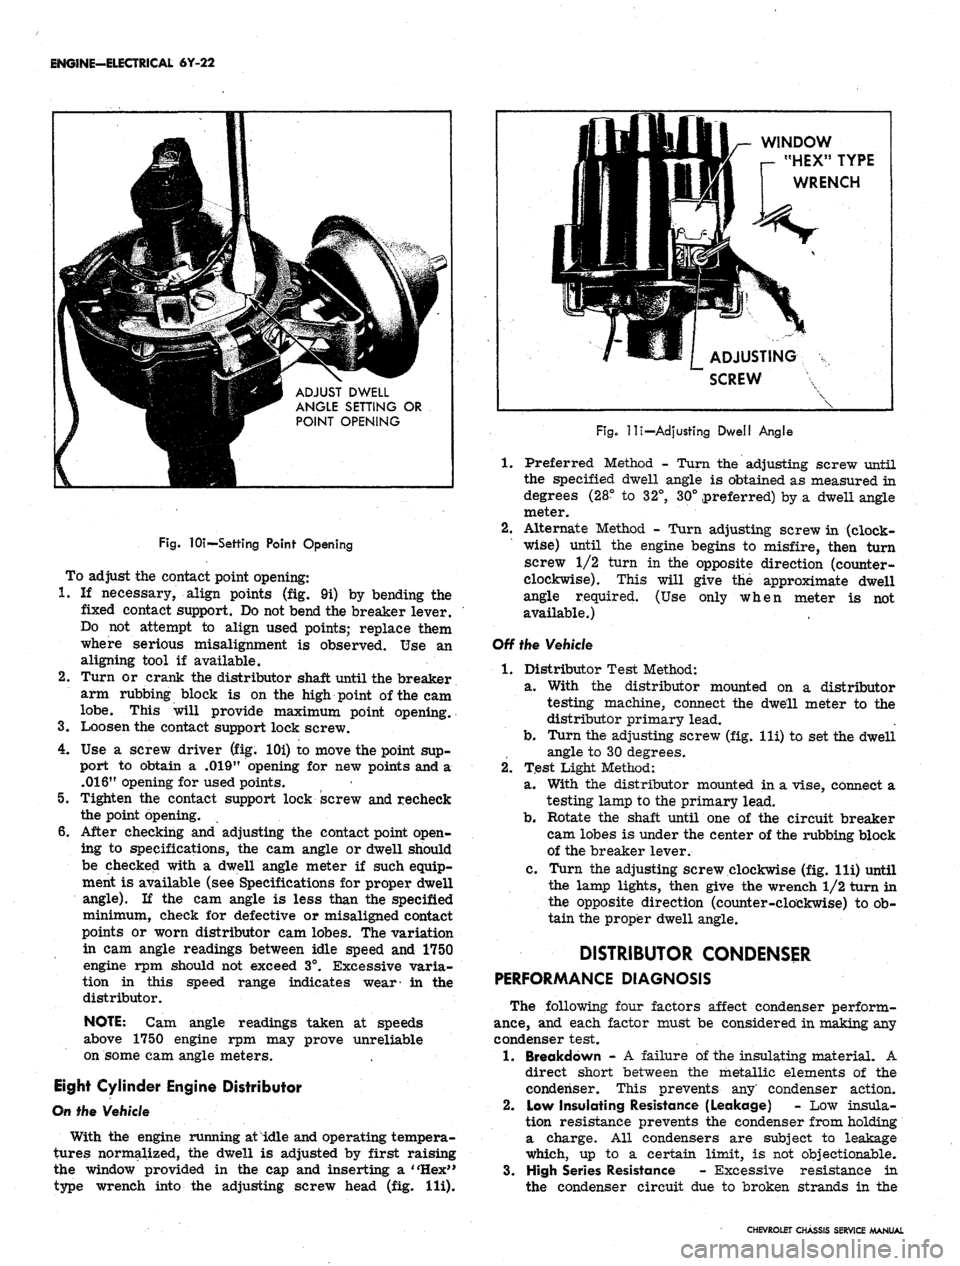 CHEVROLET CAMARO 1967 1.G Chassis Workshop Manual 
ENGINE-ELECTRICAL 6Y-22

ADJUST DWELL

ANGLE SETTING OR

POINT OPENING

Fig.
 lOi—Settihg Point Opening

To adjust the contact point opening:

1.
 If necessary, align points (fig. 9i) by bending th